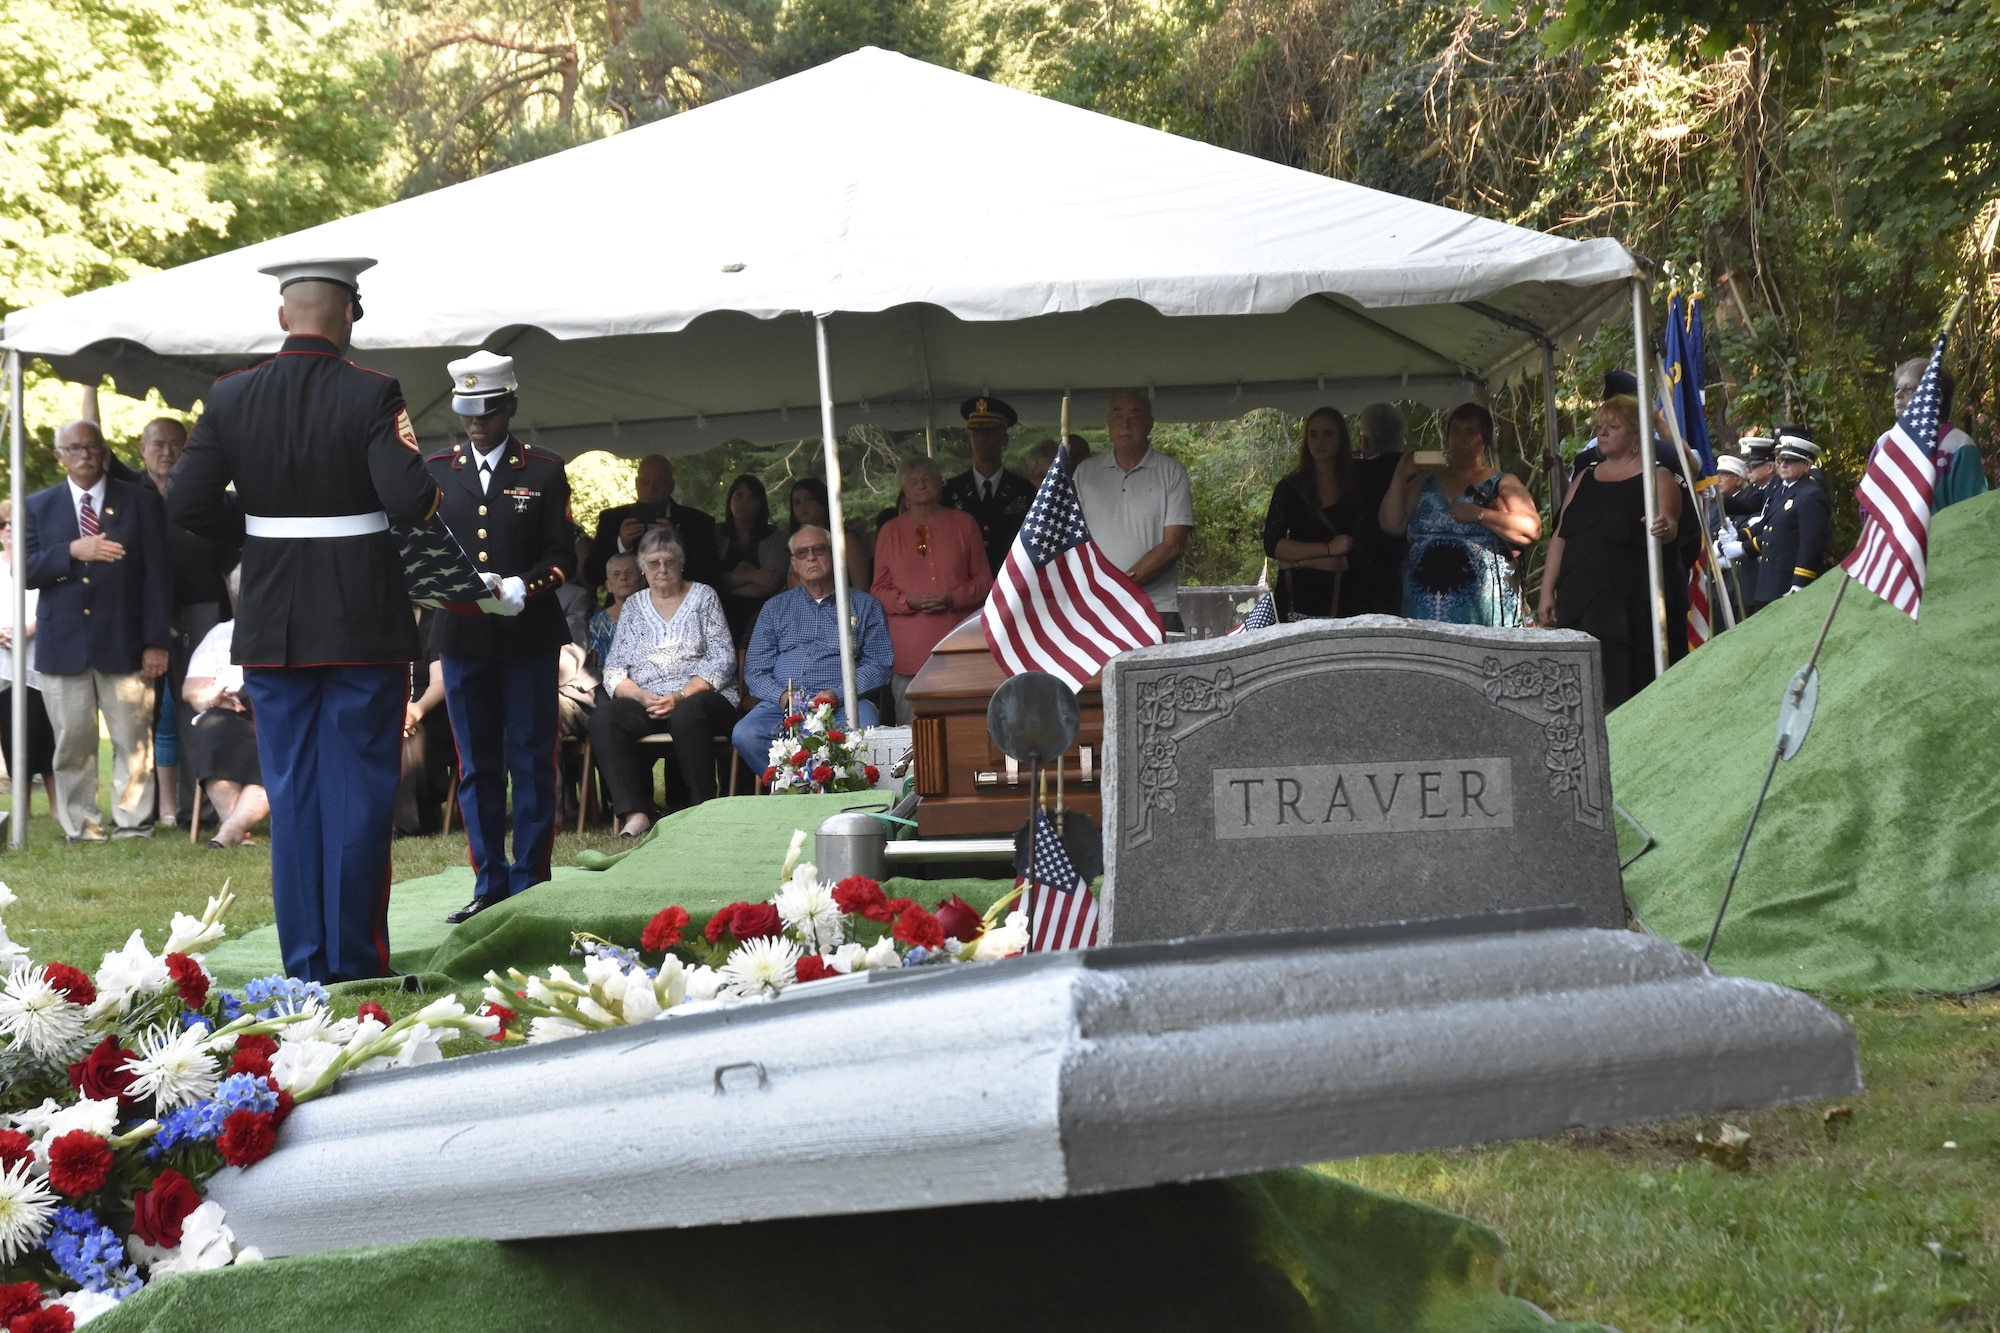 Pfc. George H. Traver was killed in action on Nov. 20, 1943. His body was one of many found earlier this year in the Gilbert Islands, just off the coast of Hawaii. The Marine Air Support Squadron 6 from Westover ARB, Mass. presided over the formal military funeral ceremony and presented his nephew, David Silliman, with a United States flag in his honor. (U.S. Air Force photo/ TSgt. Amelia Leonard)